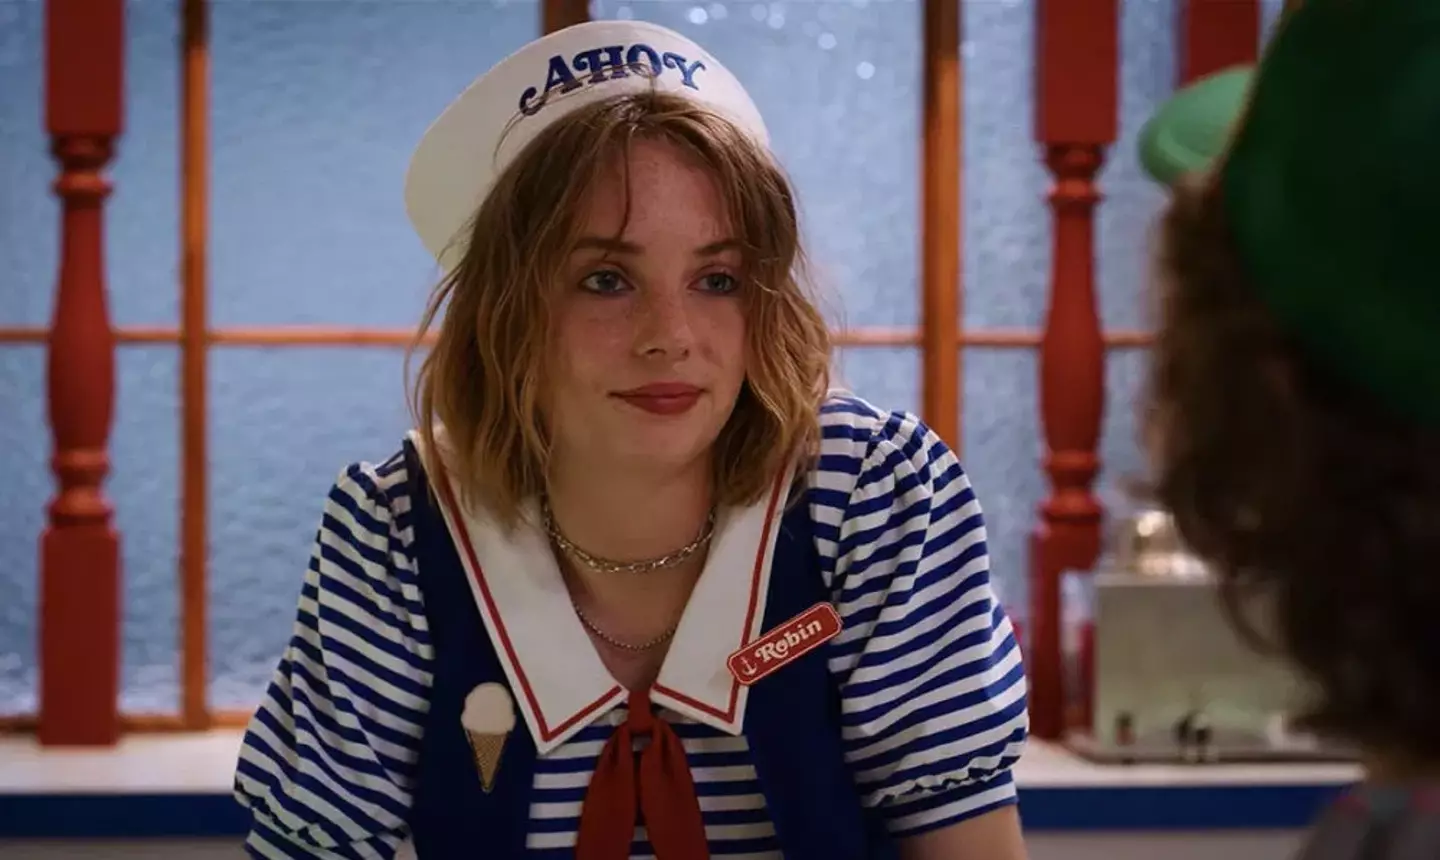 Stranger Things fans now know why Maya Hawke looks familiar.